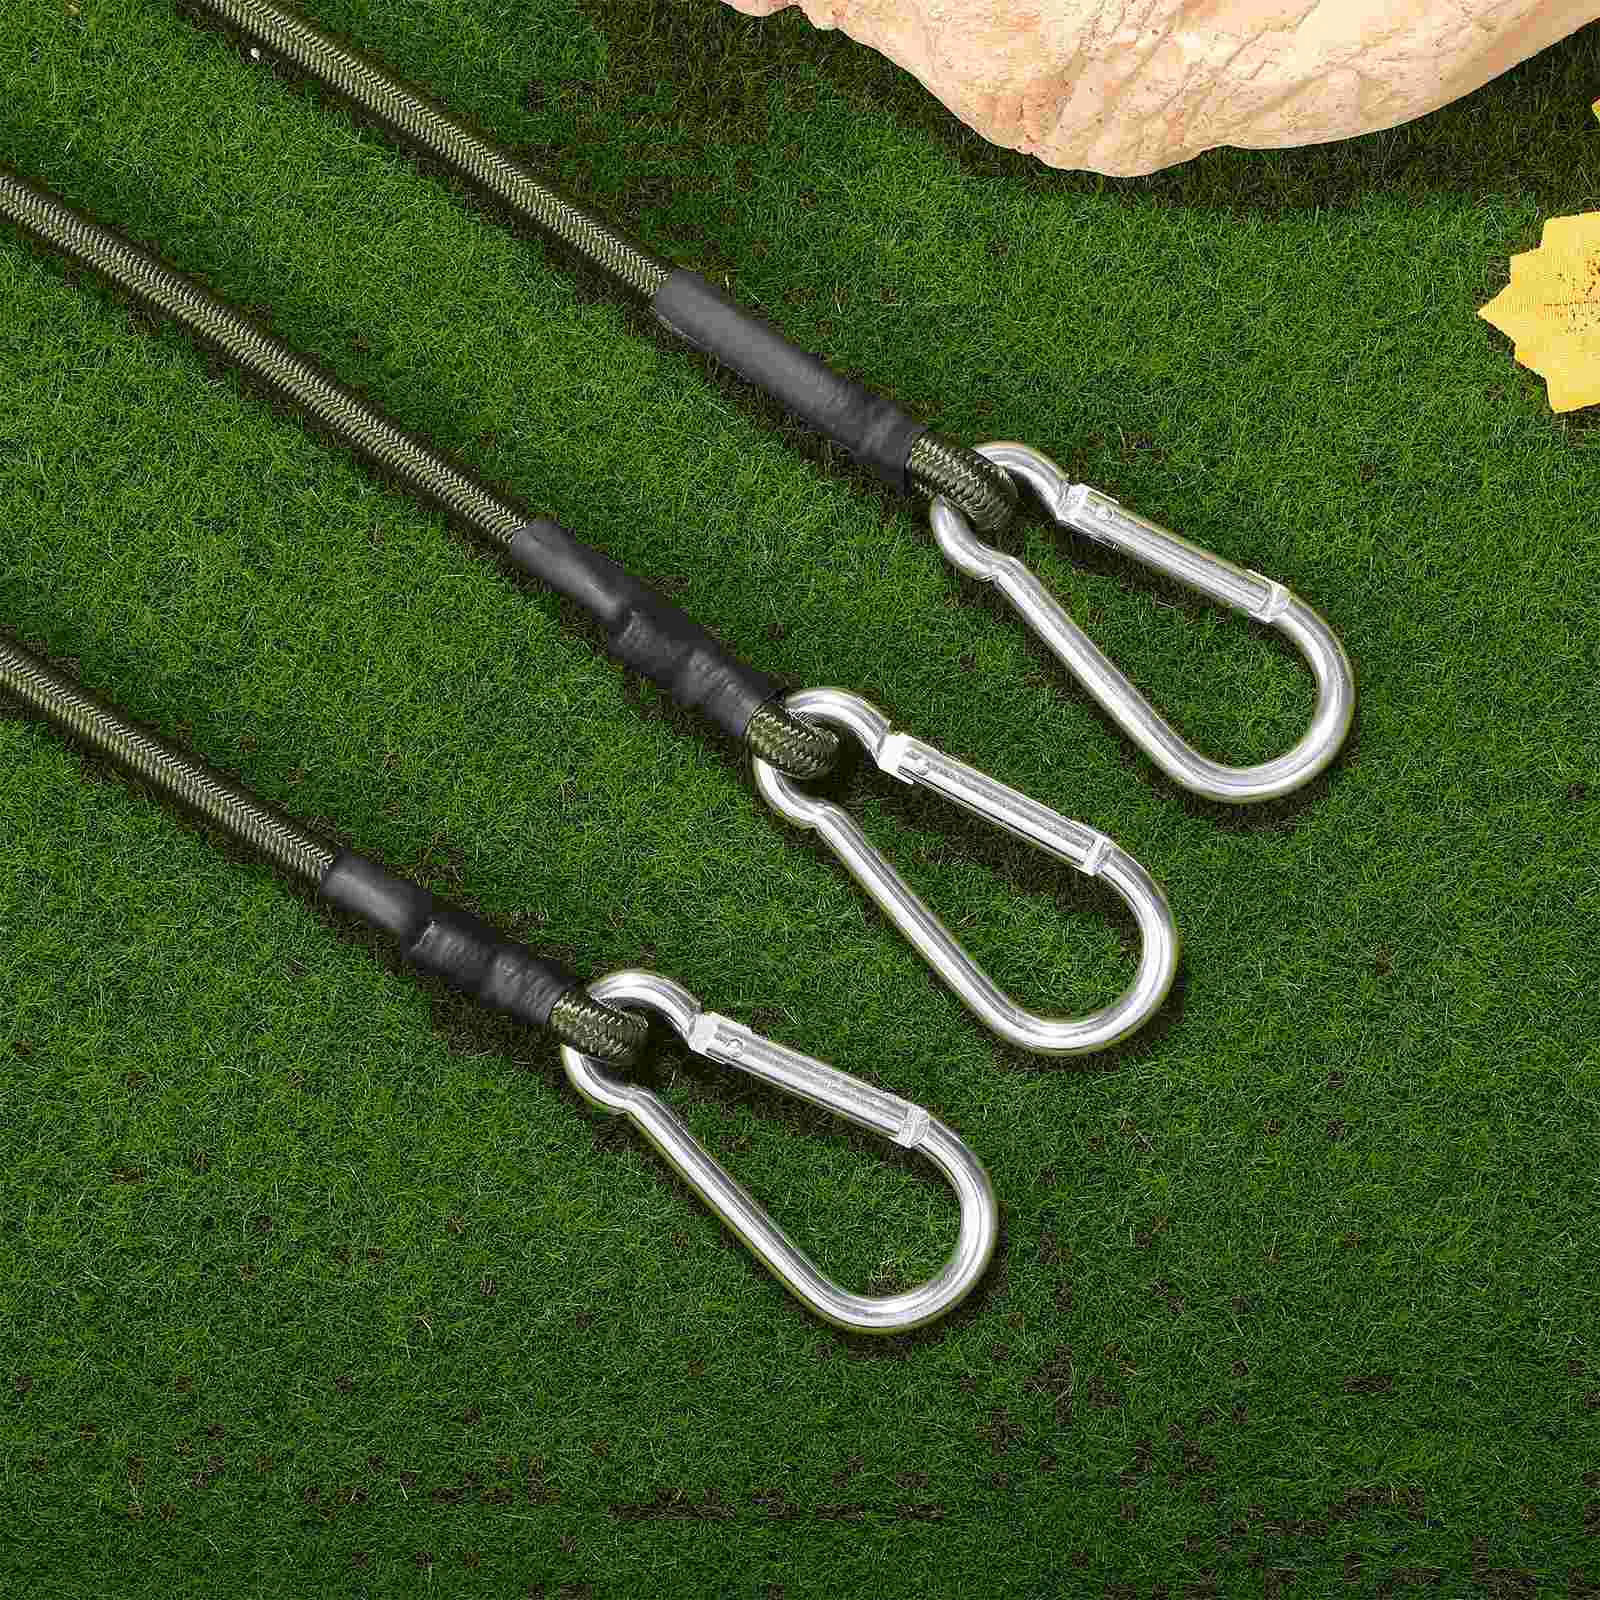 

6 Pcs Elastic Rope Packing Cords Tent Camping Fixing Rubber Material Binding Belt Clothesline Outdoor Tents